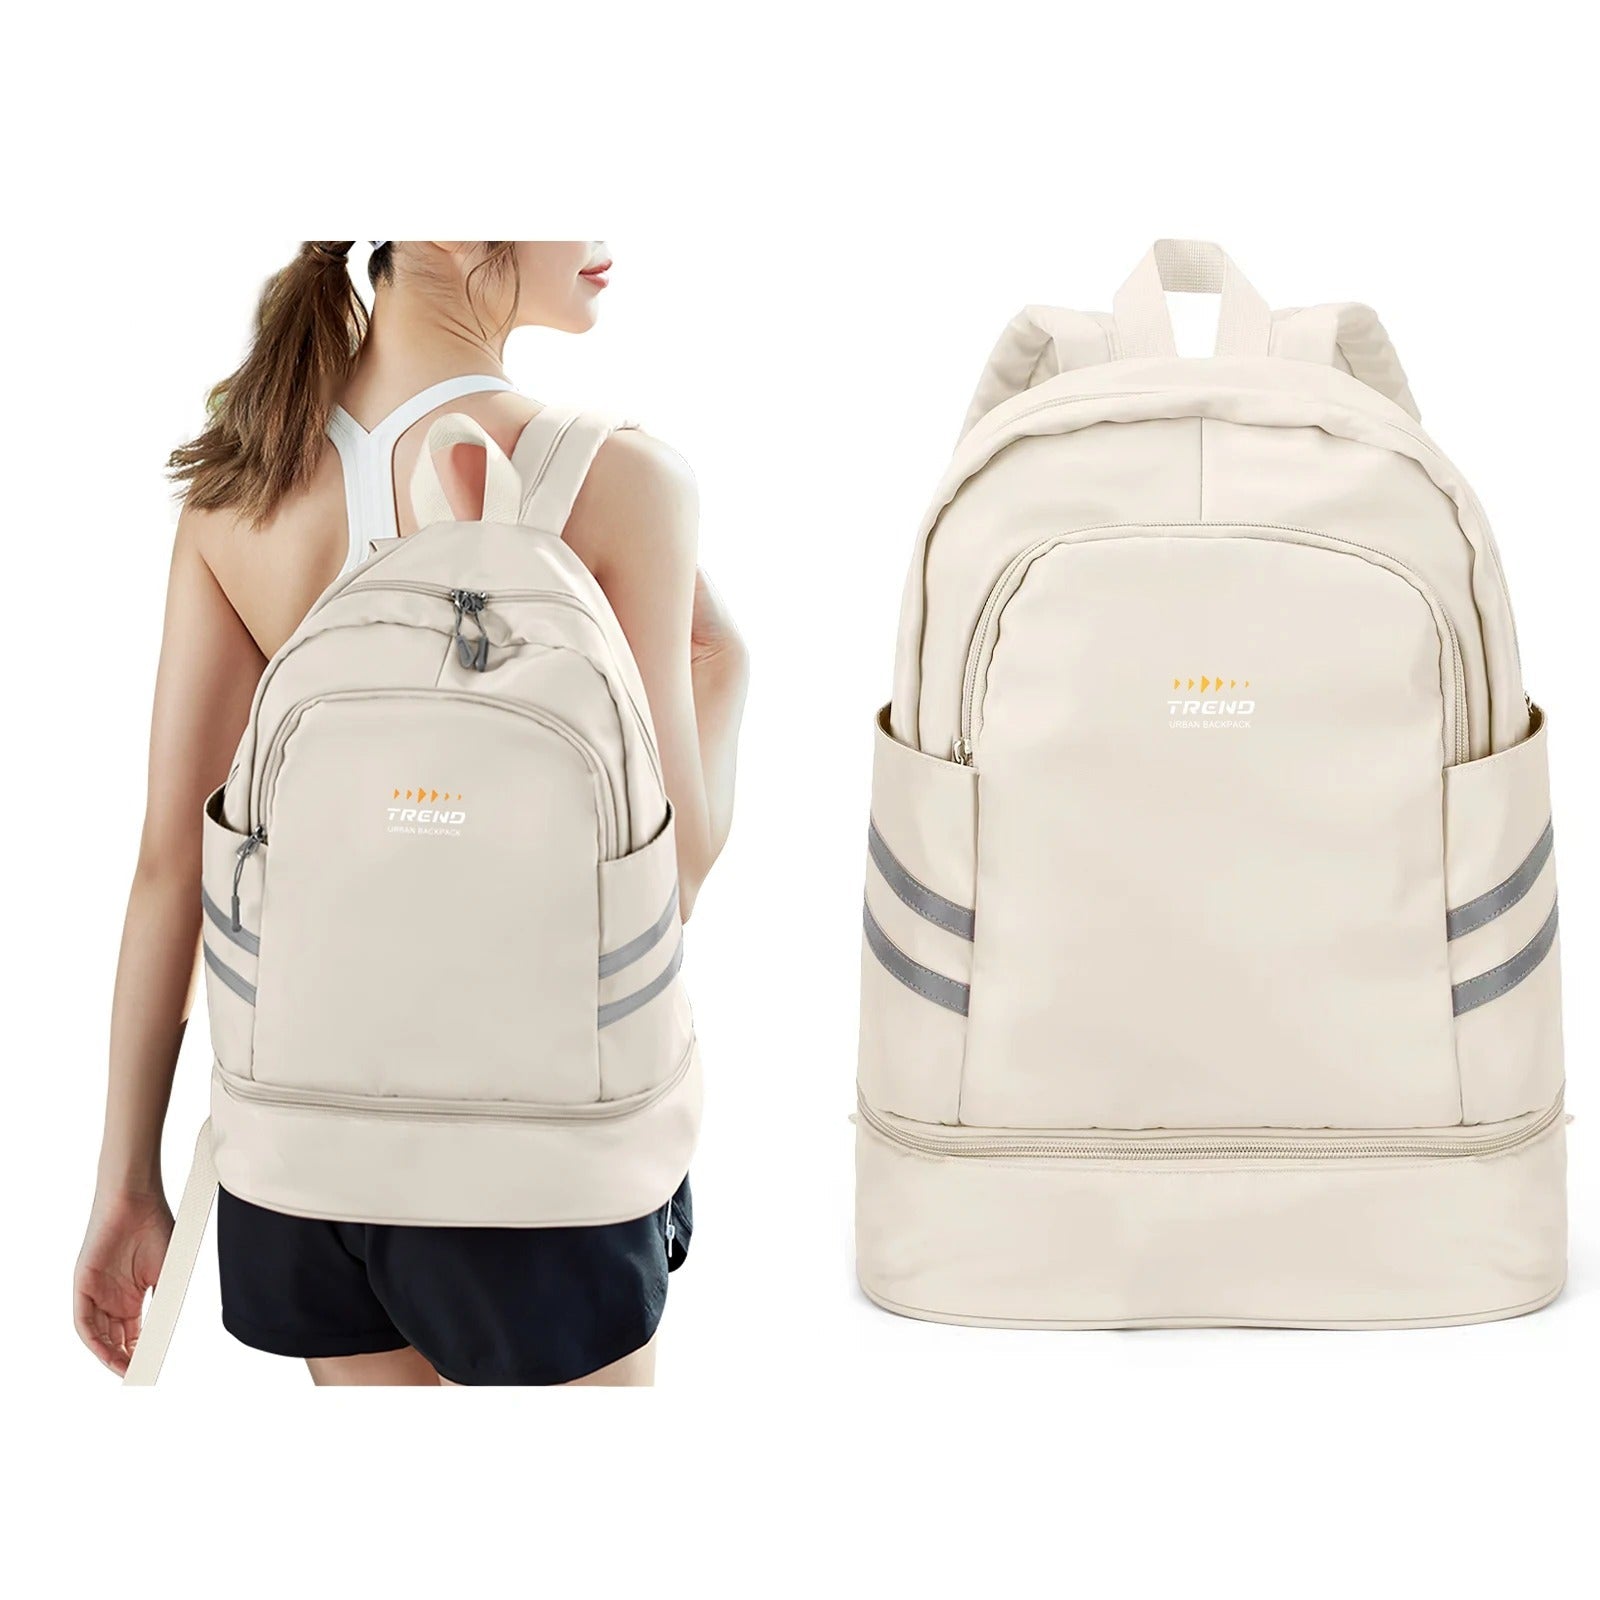 Lightweight Gym Backpack - Beige / Small